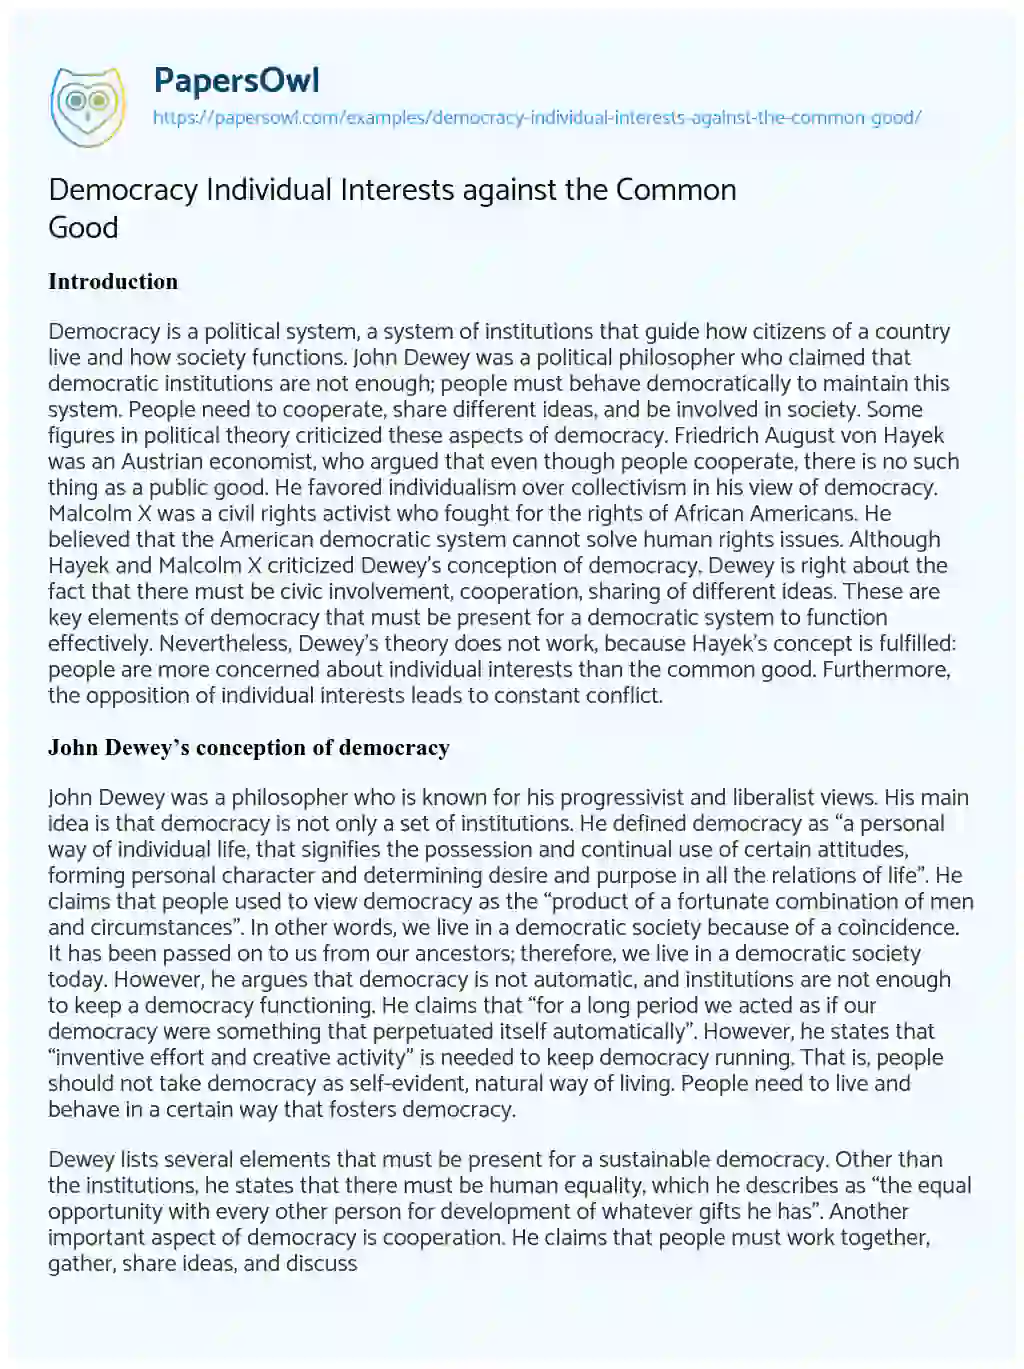 Essay on Democracy Individual Interests against the Common Good